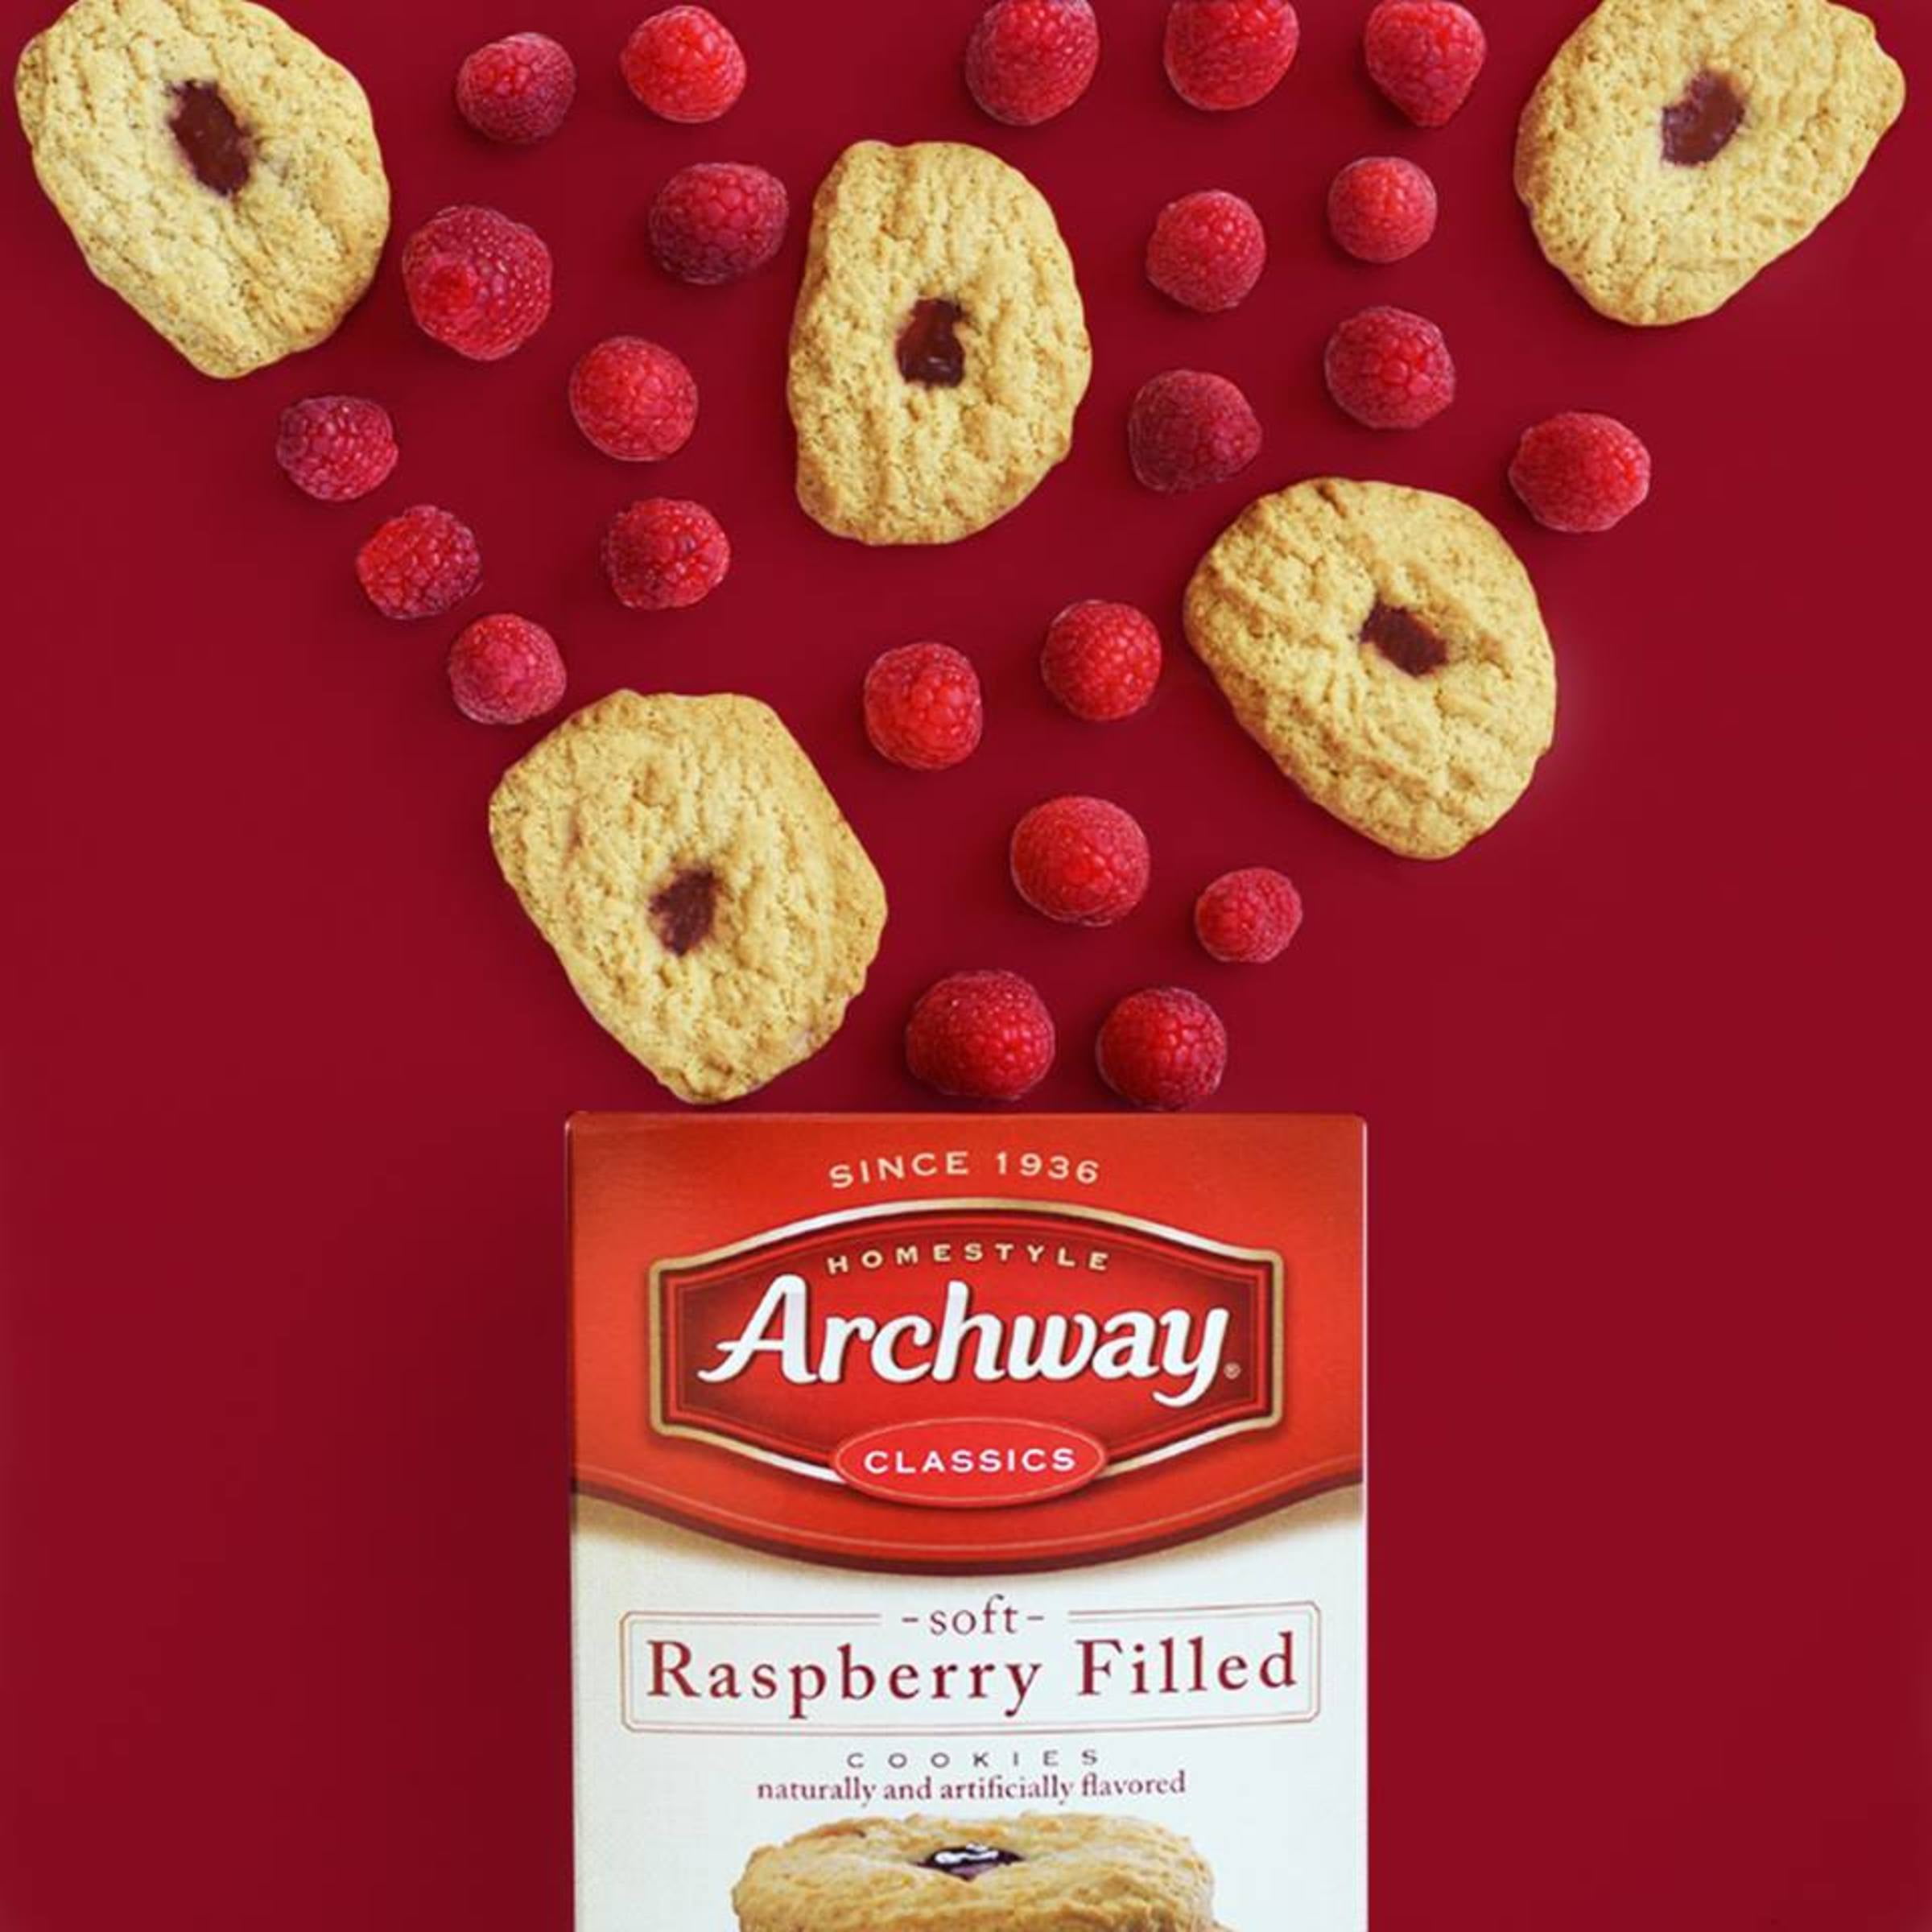 This is a taste test/review of the archway classics soft cookies in three v...